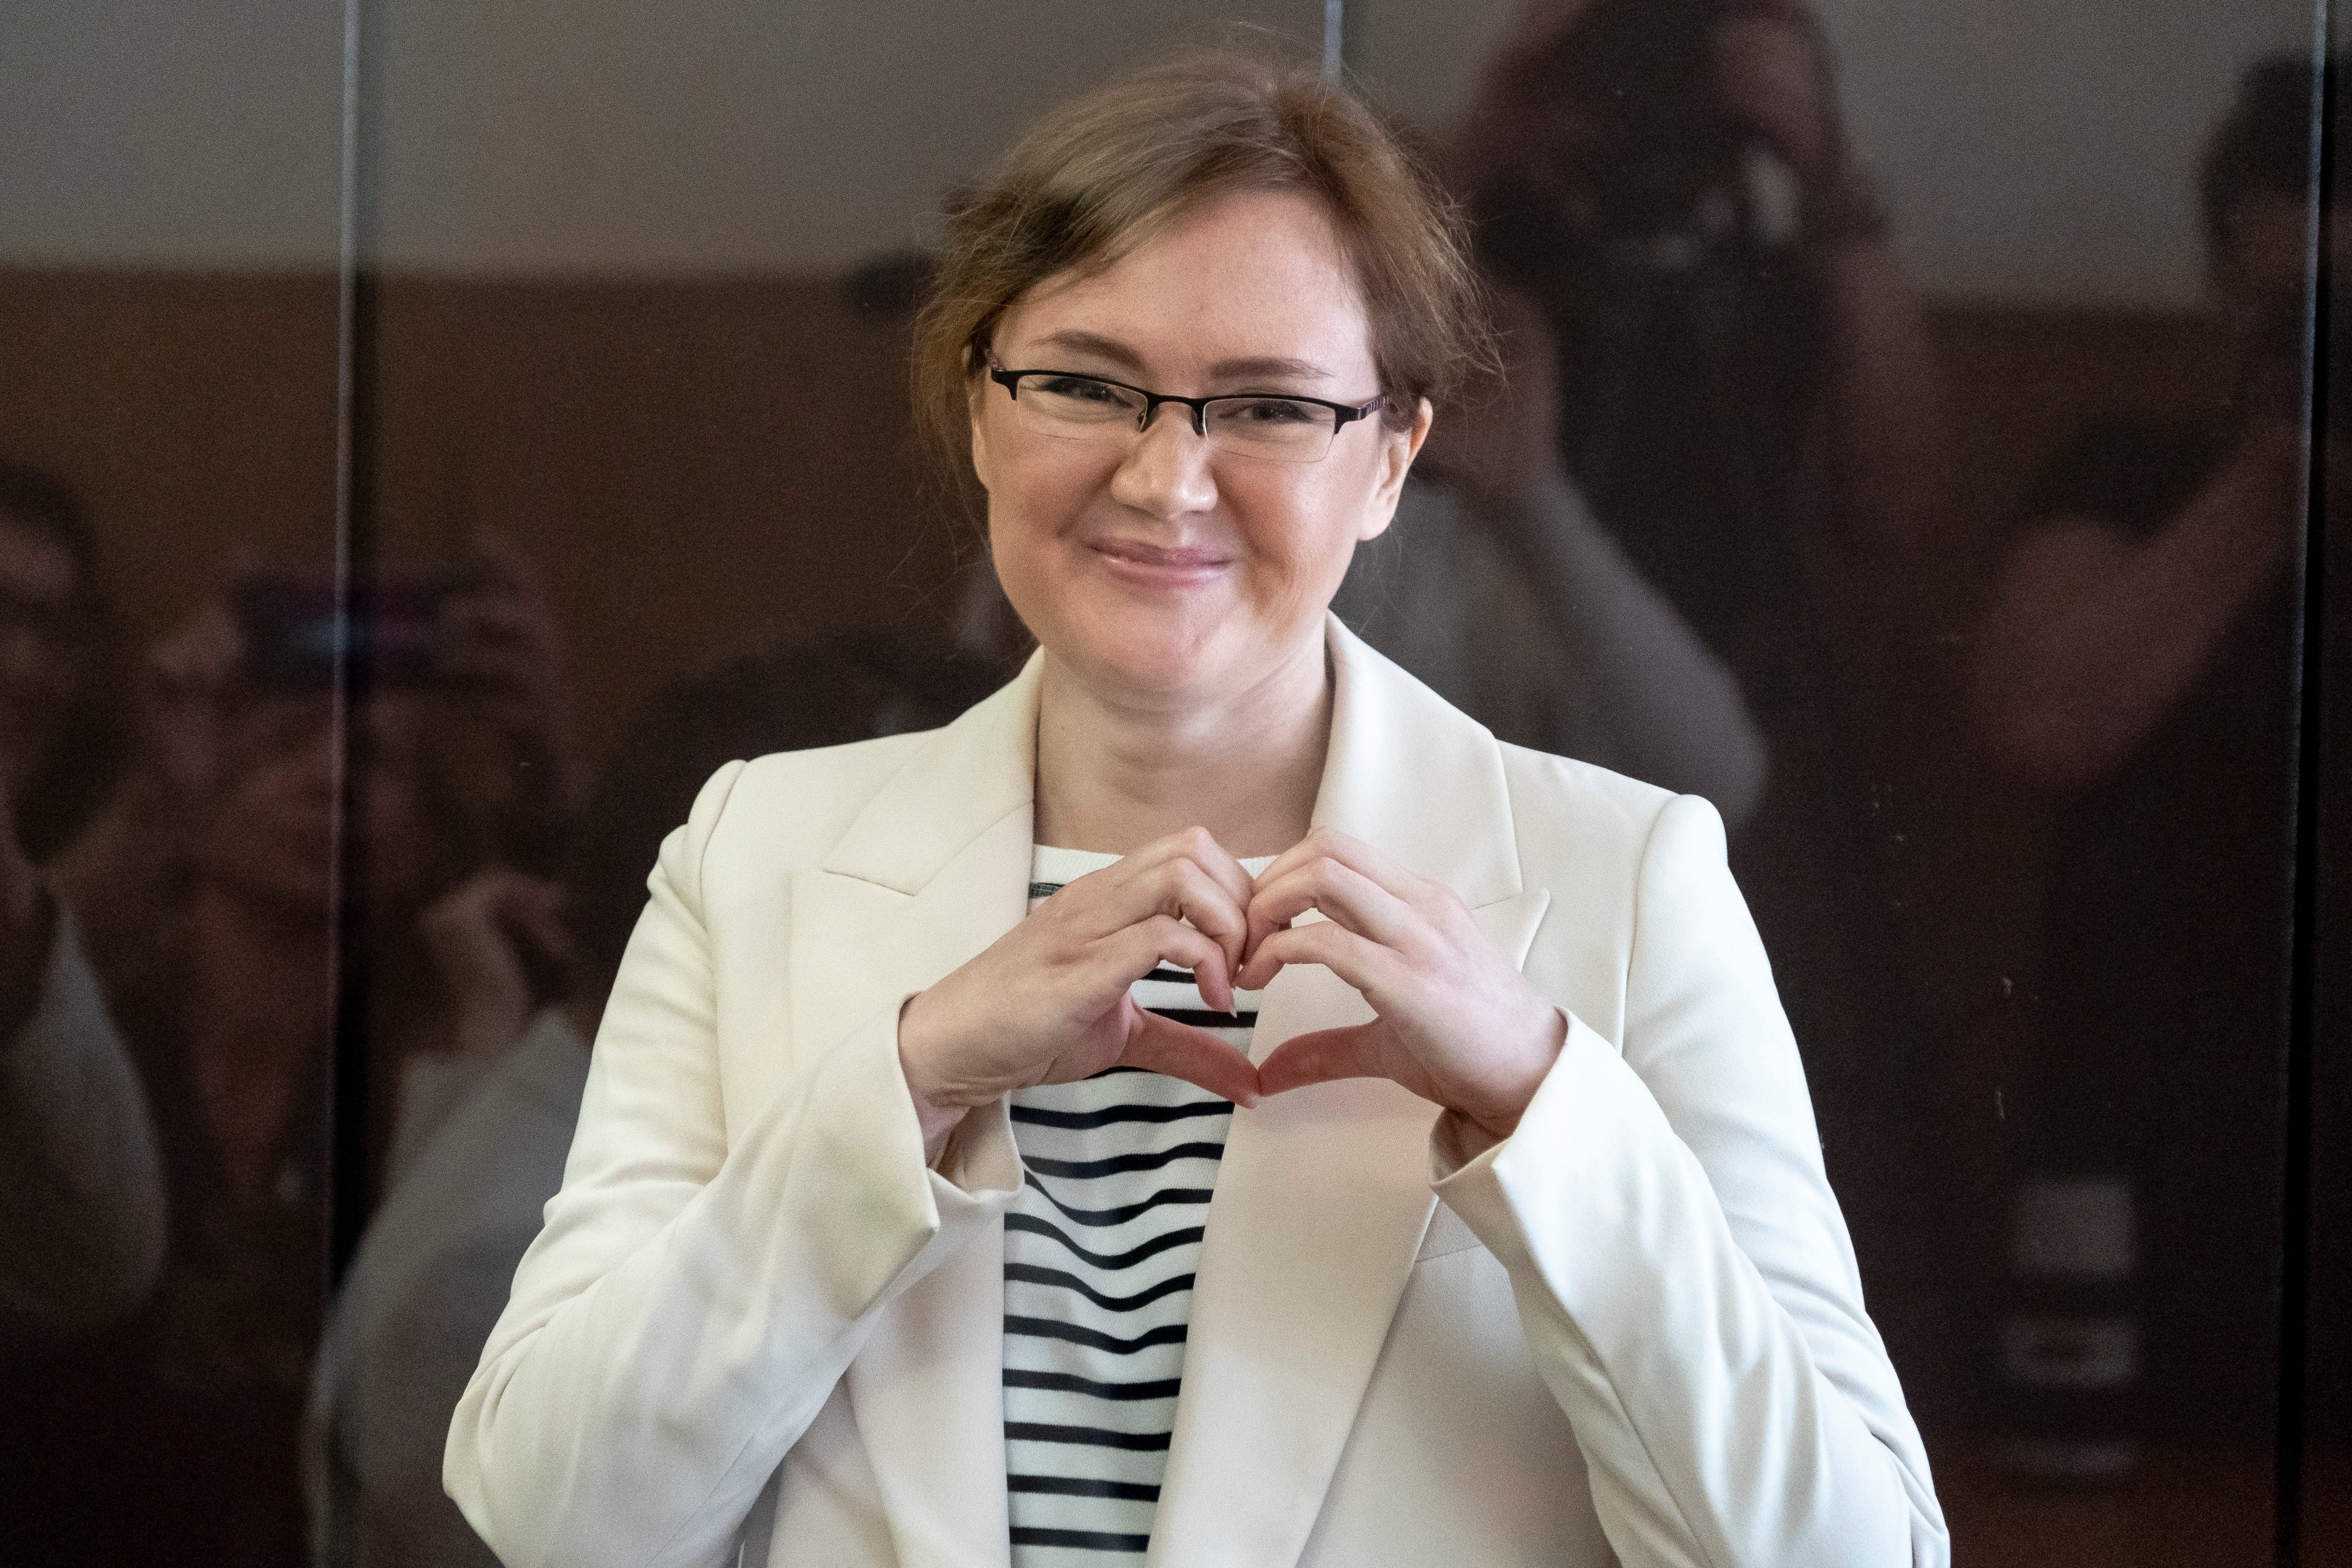 Lilia Chanysheva makes a heart gesture as she is standing in a cage during the court hearing